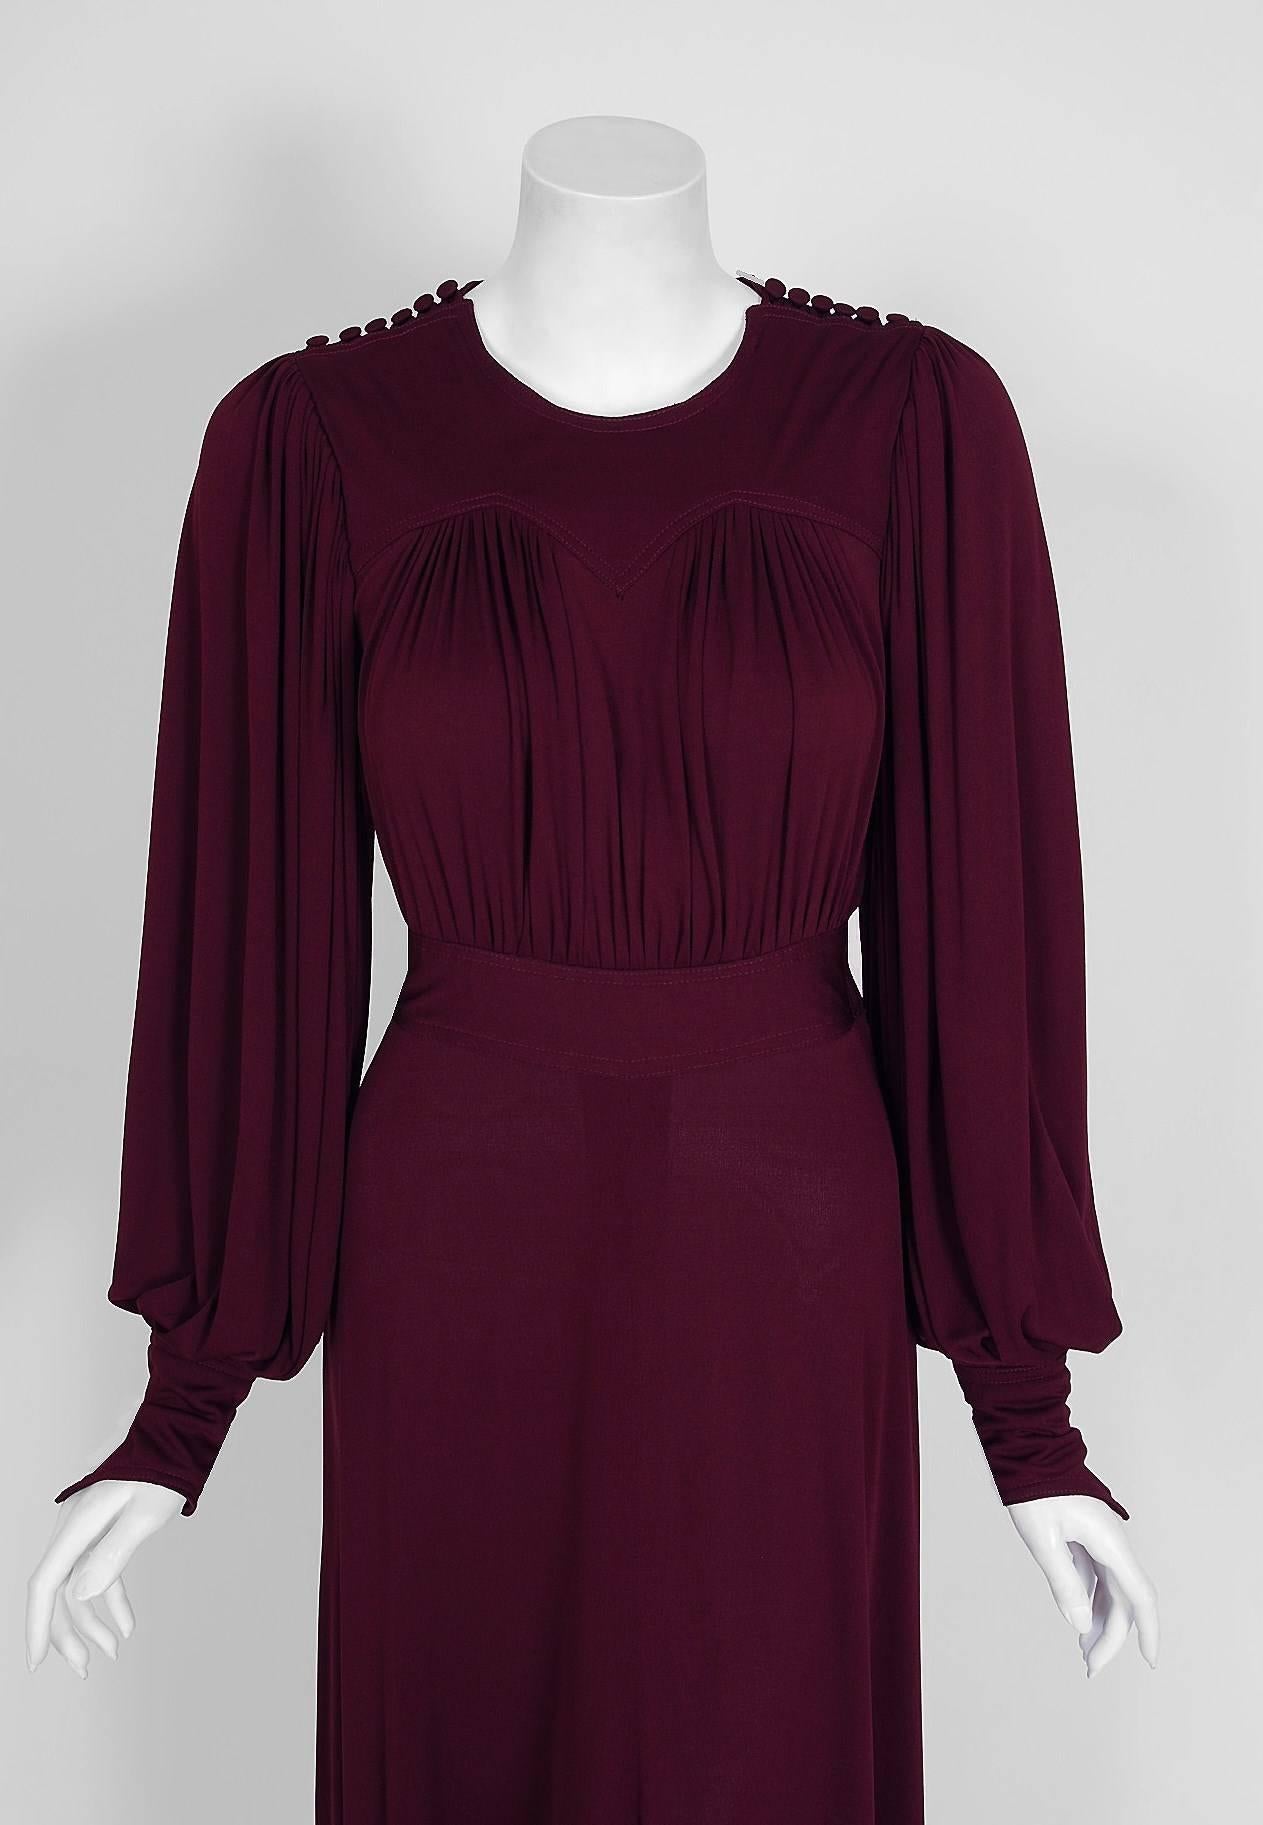 A captivating plum purple silk-jersey Quorum dress that is both timeless and chic. Founded by Alice Pollock and Ossie Clark, Quorum was one of the most popular London boutiques of the 1960's. This garment is so unique with its ruched sweetheart and